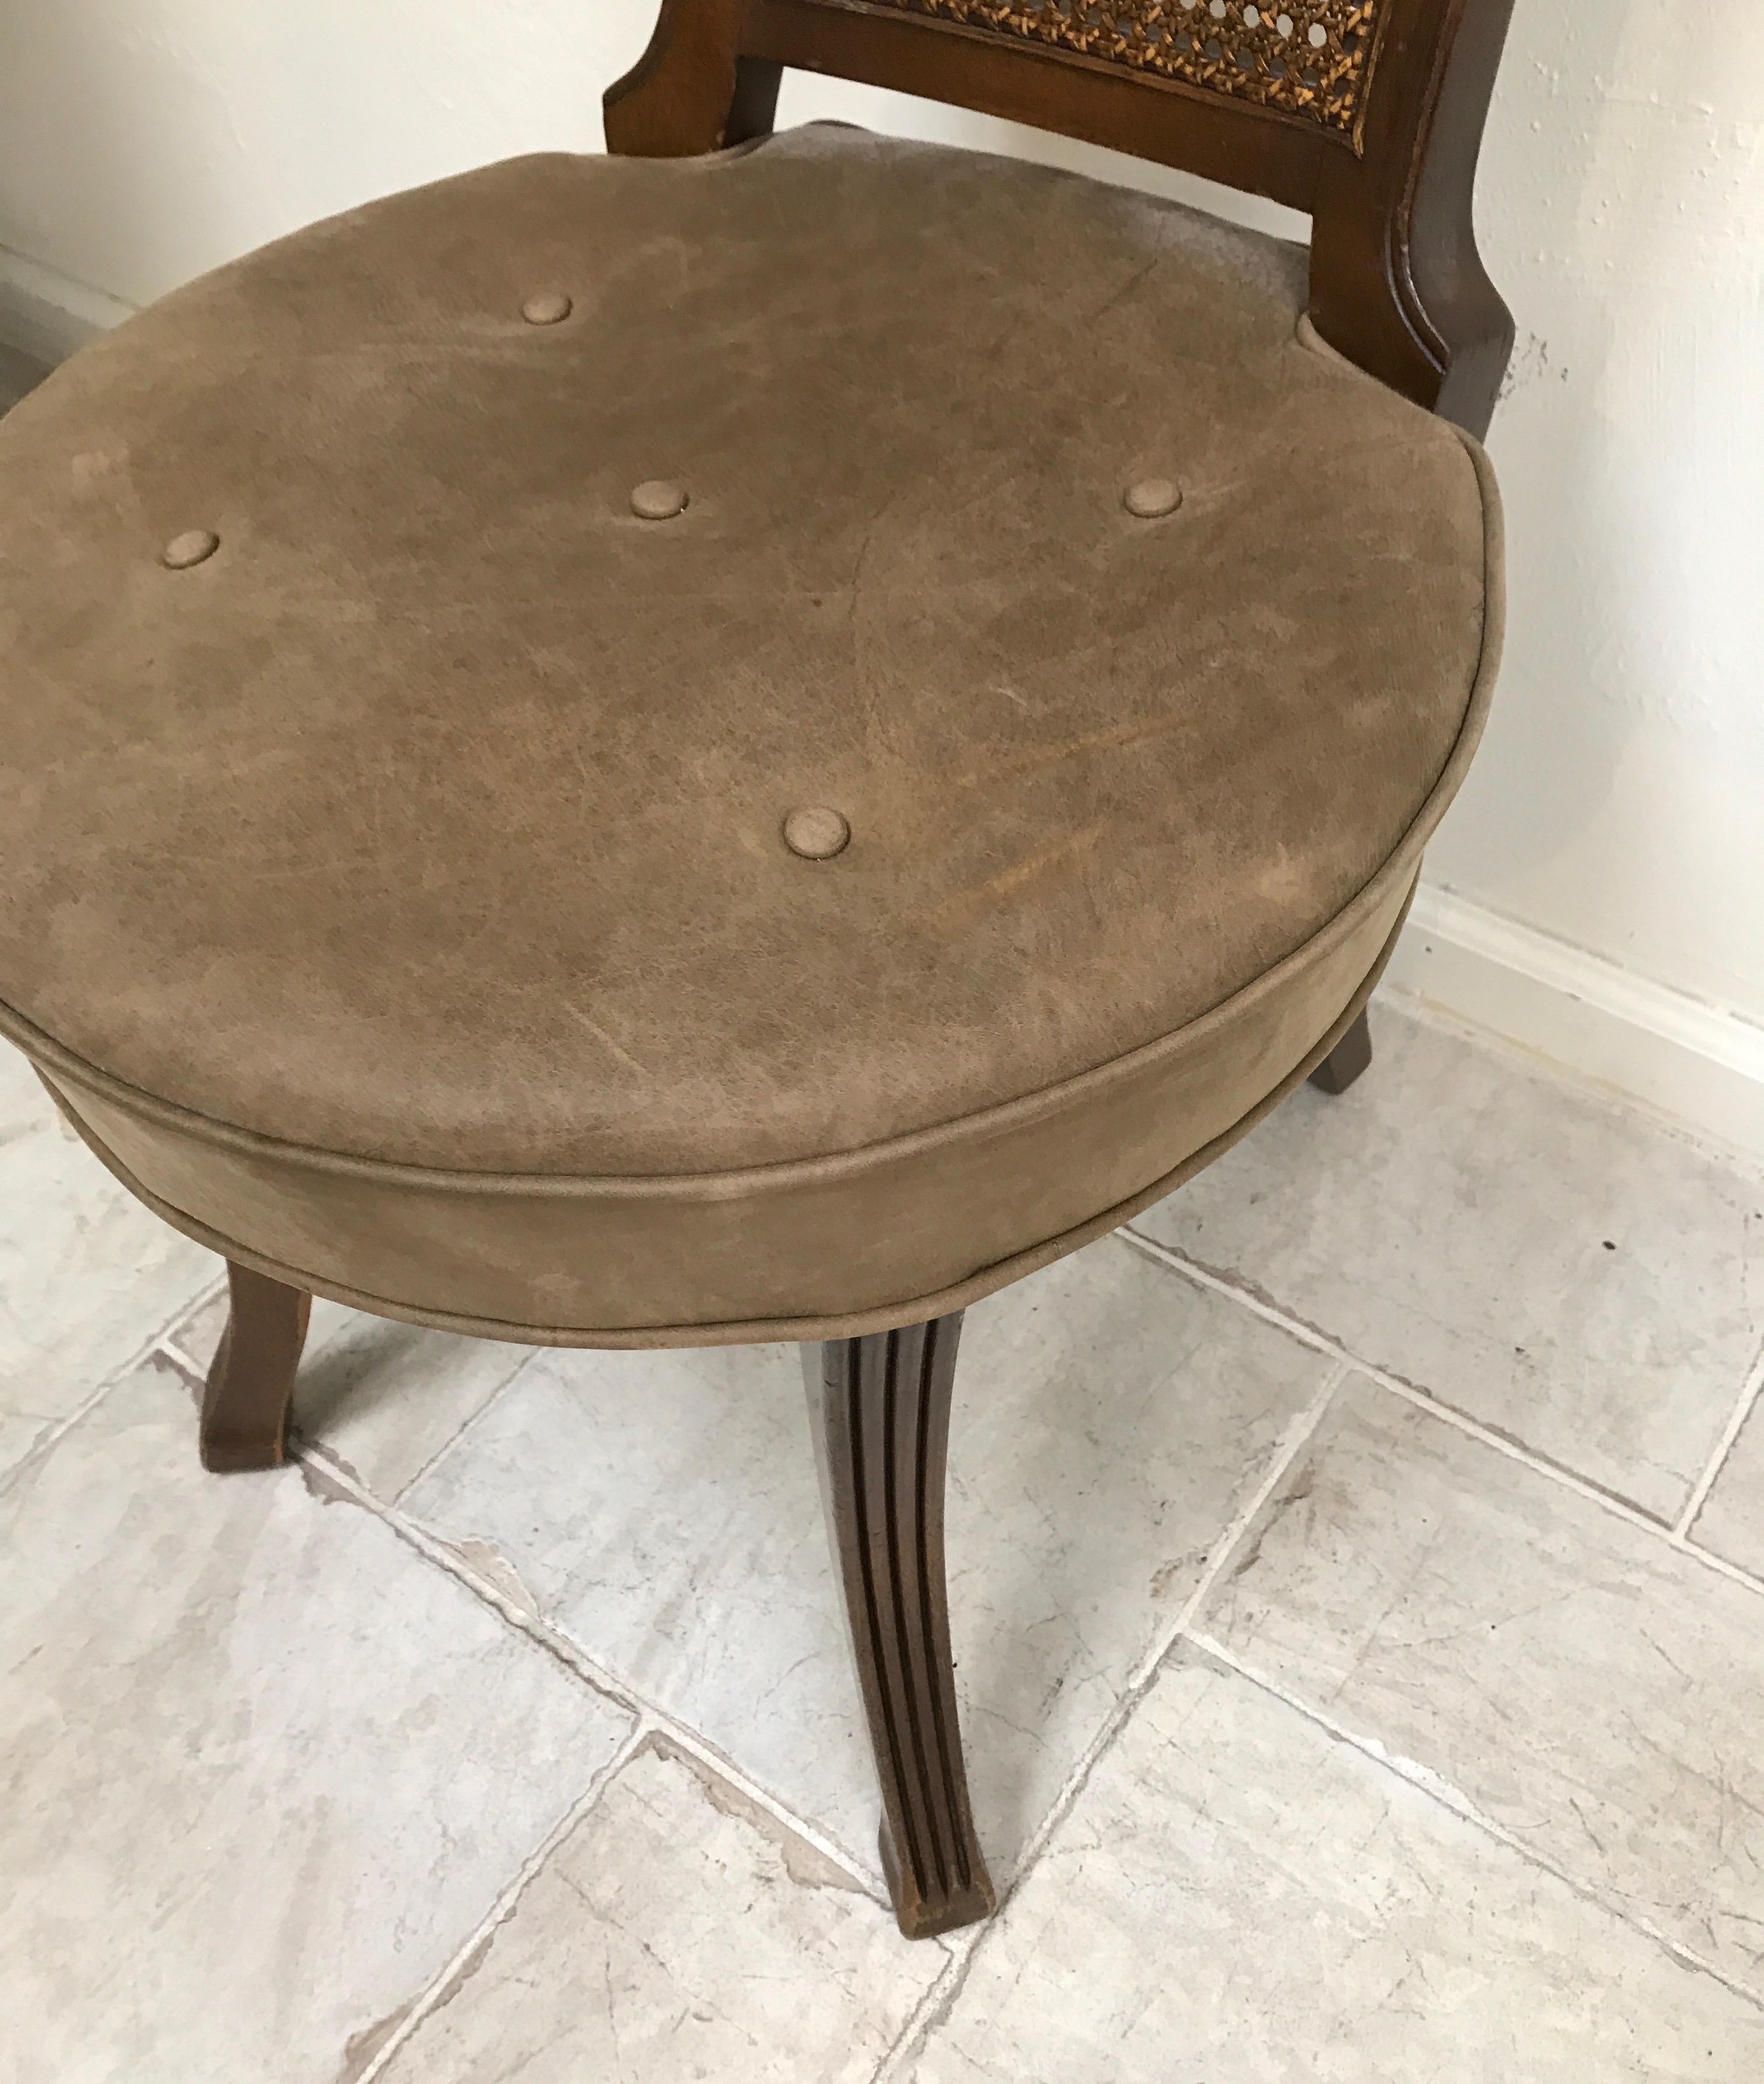 Single desk chair with round brown leather seat and cane back with brass handle on top.